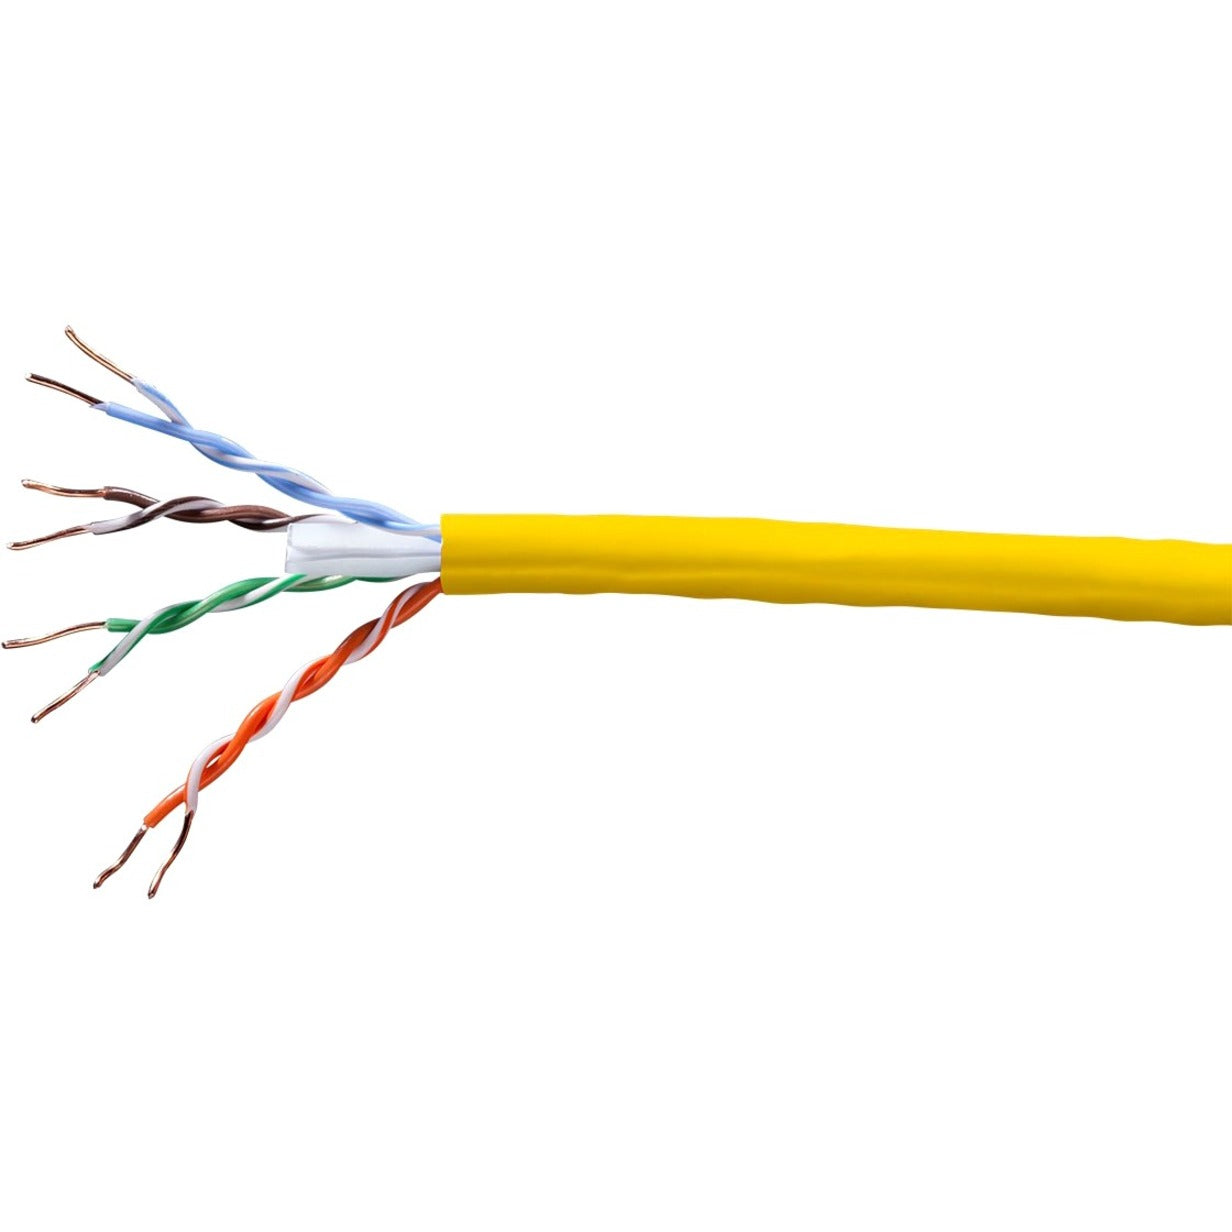 Monoprice 13737 Cat. 6 UTP Network Cable, 1000 ft, Yellow